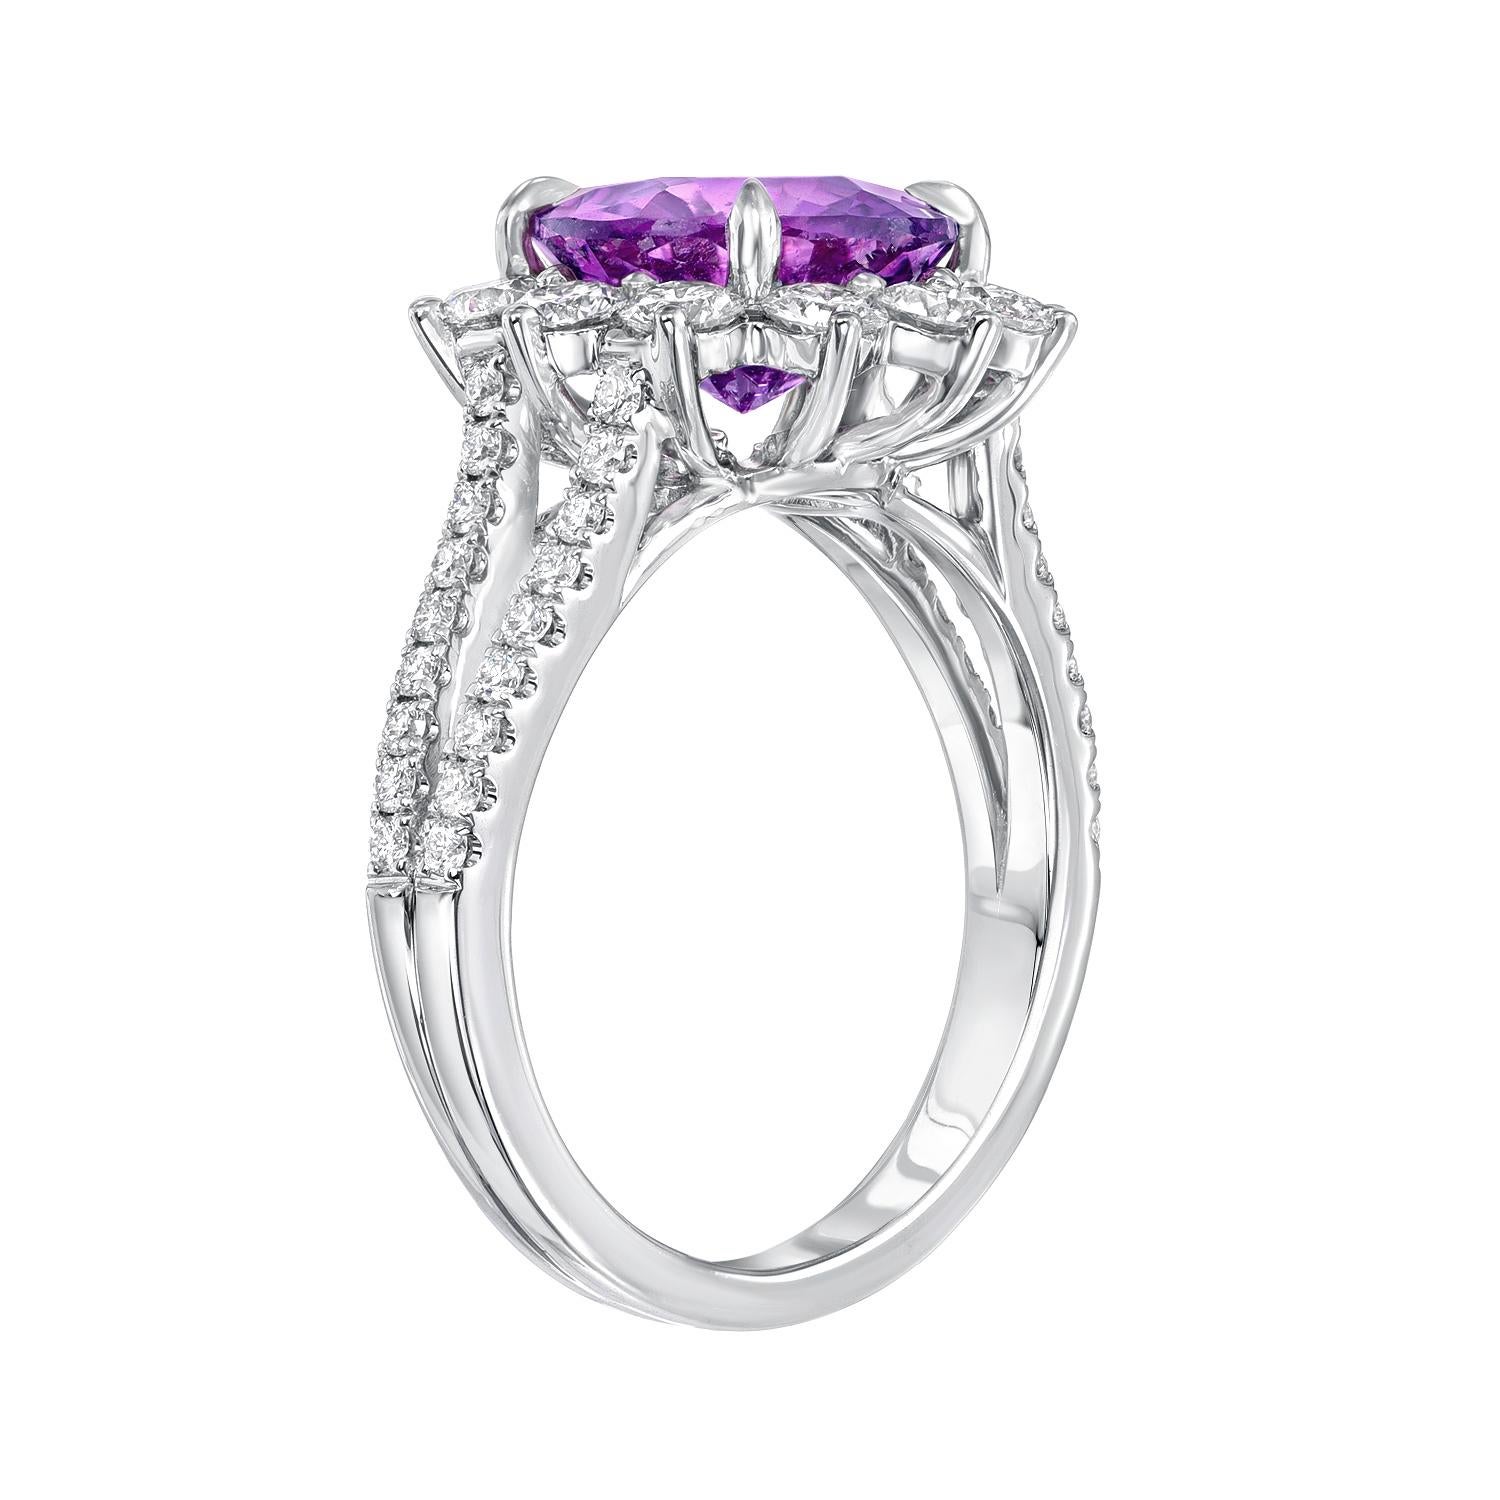 Unheated 3.58 carat Pinkish Purple Sapphire round, 18K white gold ring, surrounded by round brilliant diamonds weighing a total of 1.22 carats.
Ring size 6.5. Resizing is complementary upon request.
Crafted by extremely skilled hands in the